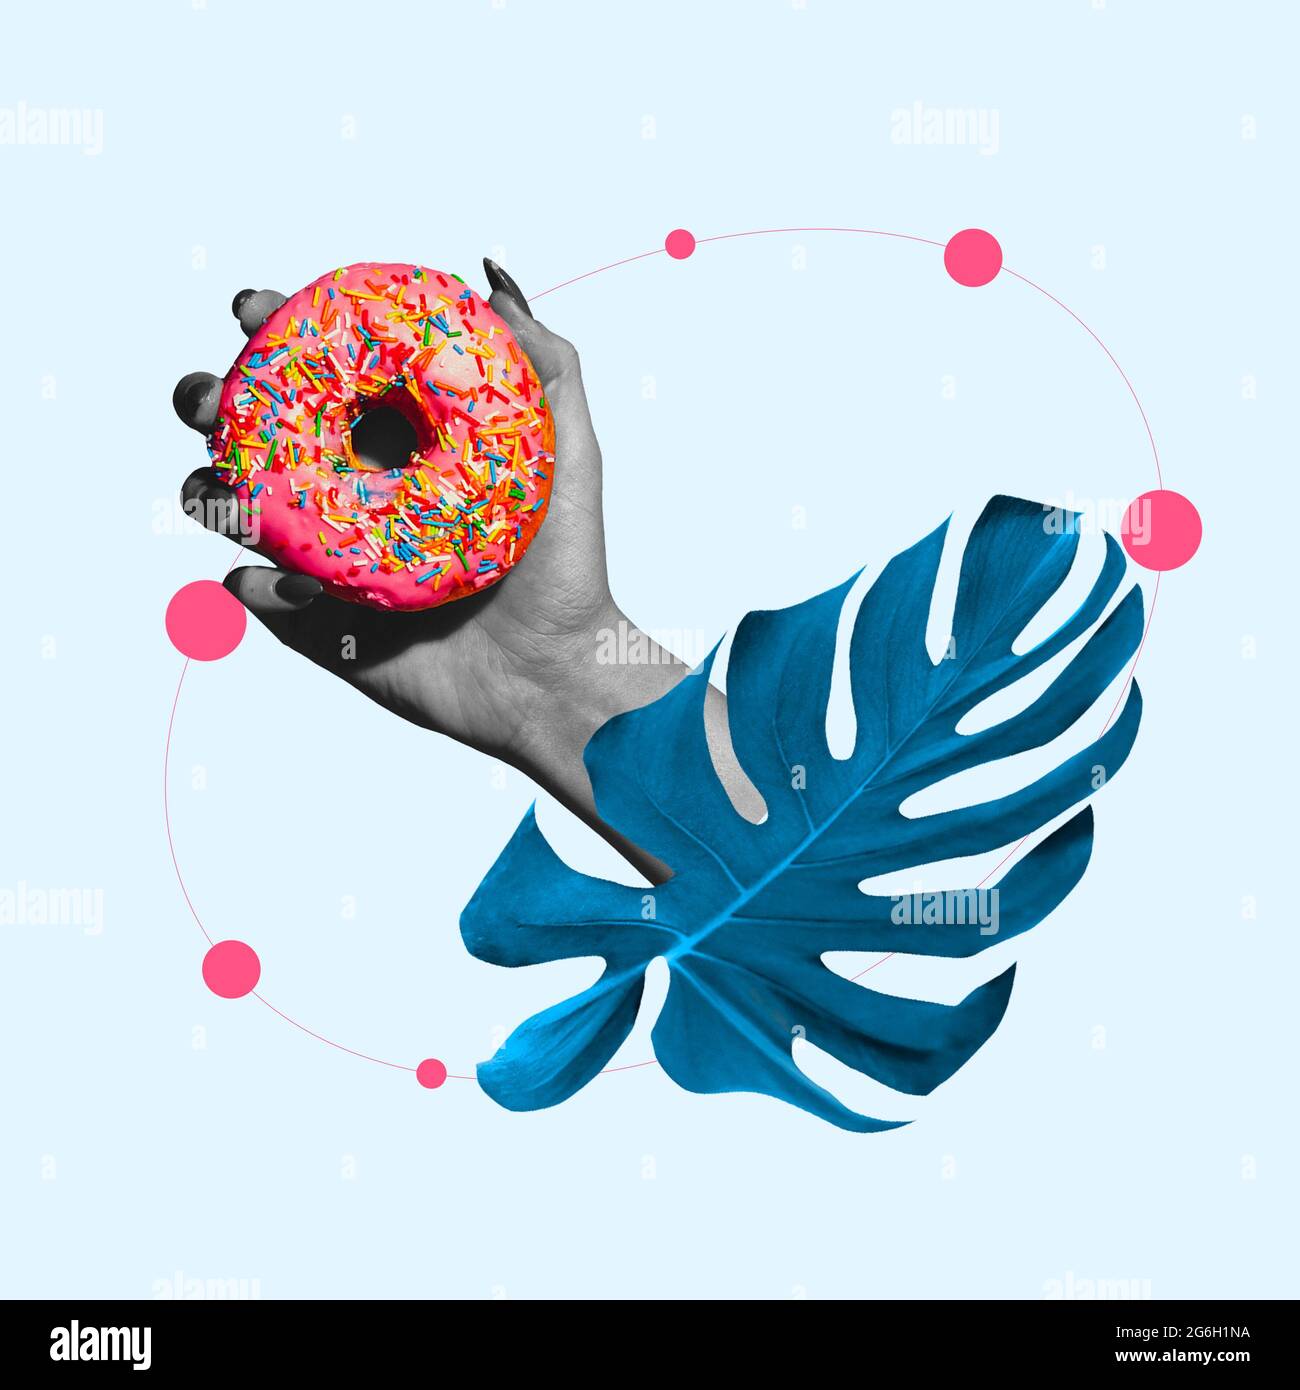 Sweets, goodies. Contemporary art collage, modern artwork. Aesthetic of hands. Trendy pastel colors. Copyspace for your ad or text. Stock Photo